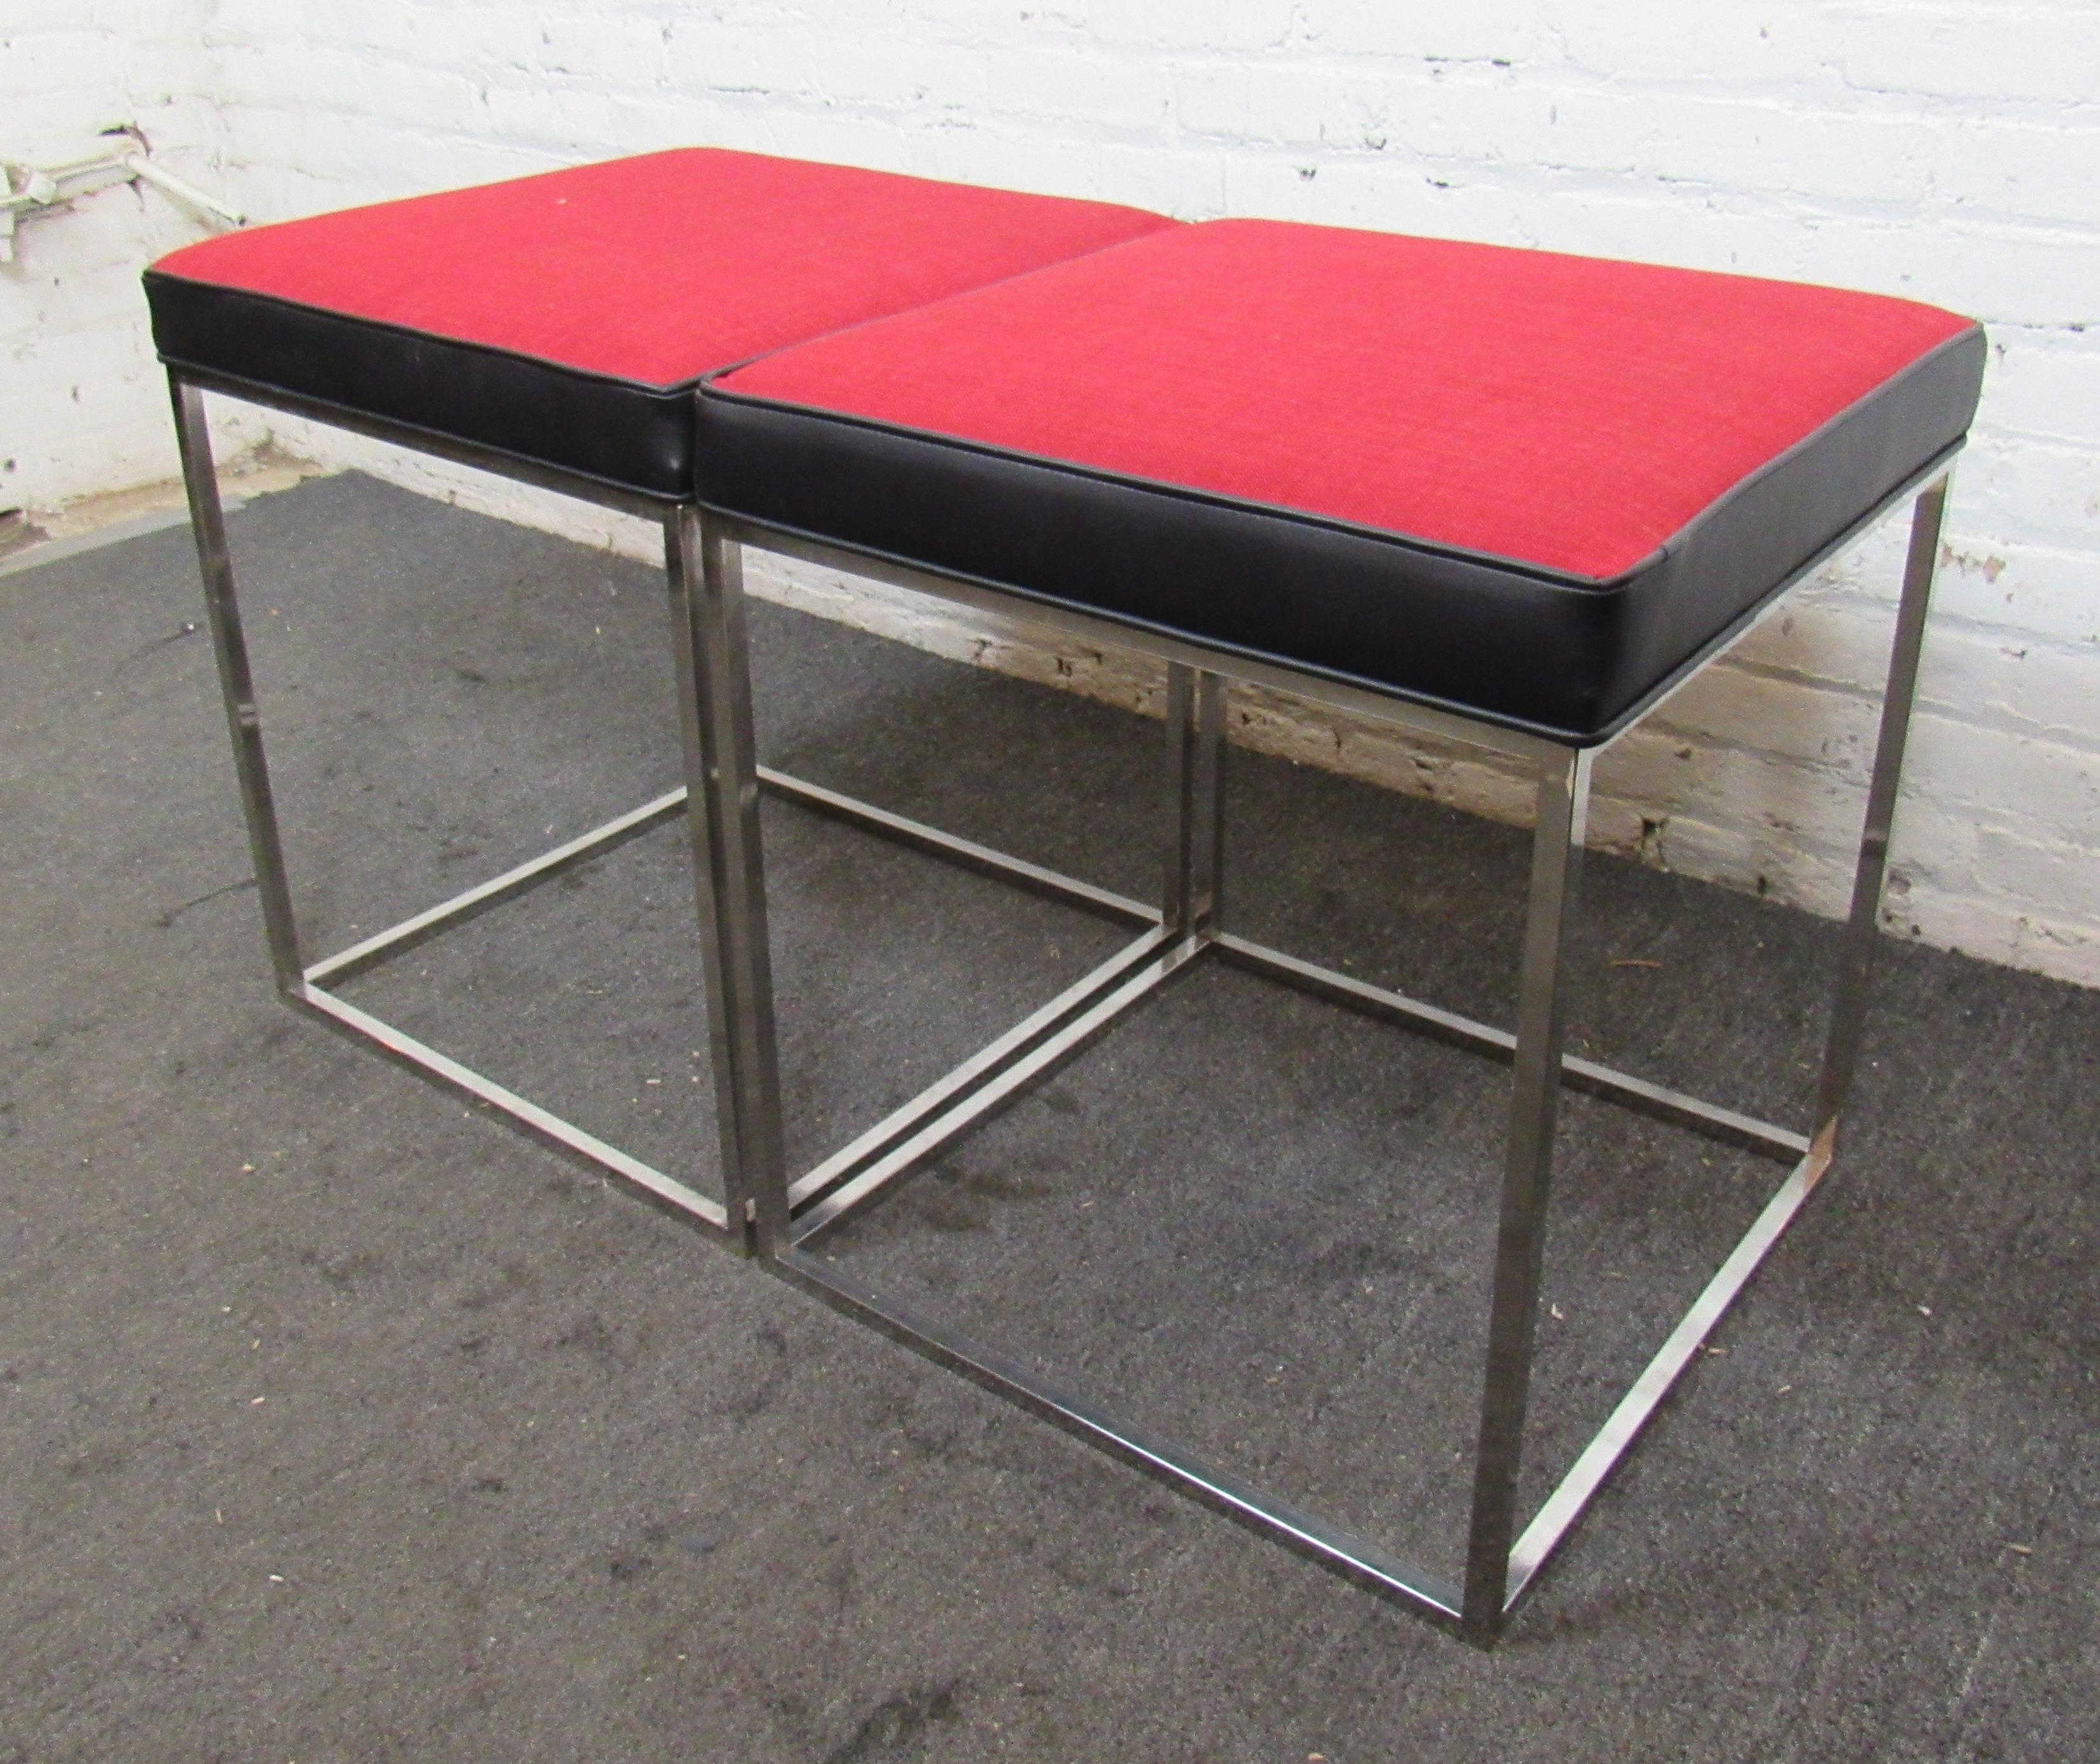 Pair of modern style footstools with black and red fabric and sleek chrome frames. Great as extra seating.
Please confirm location NY or NJ.